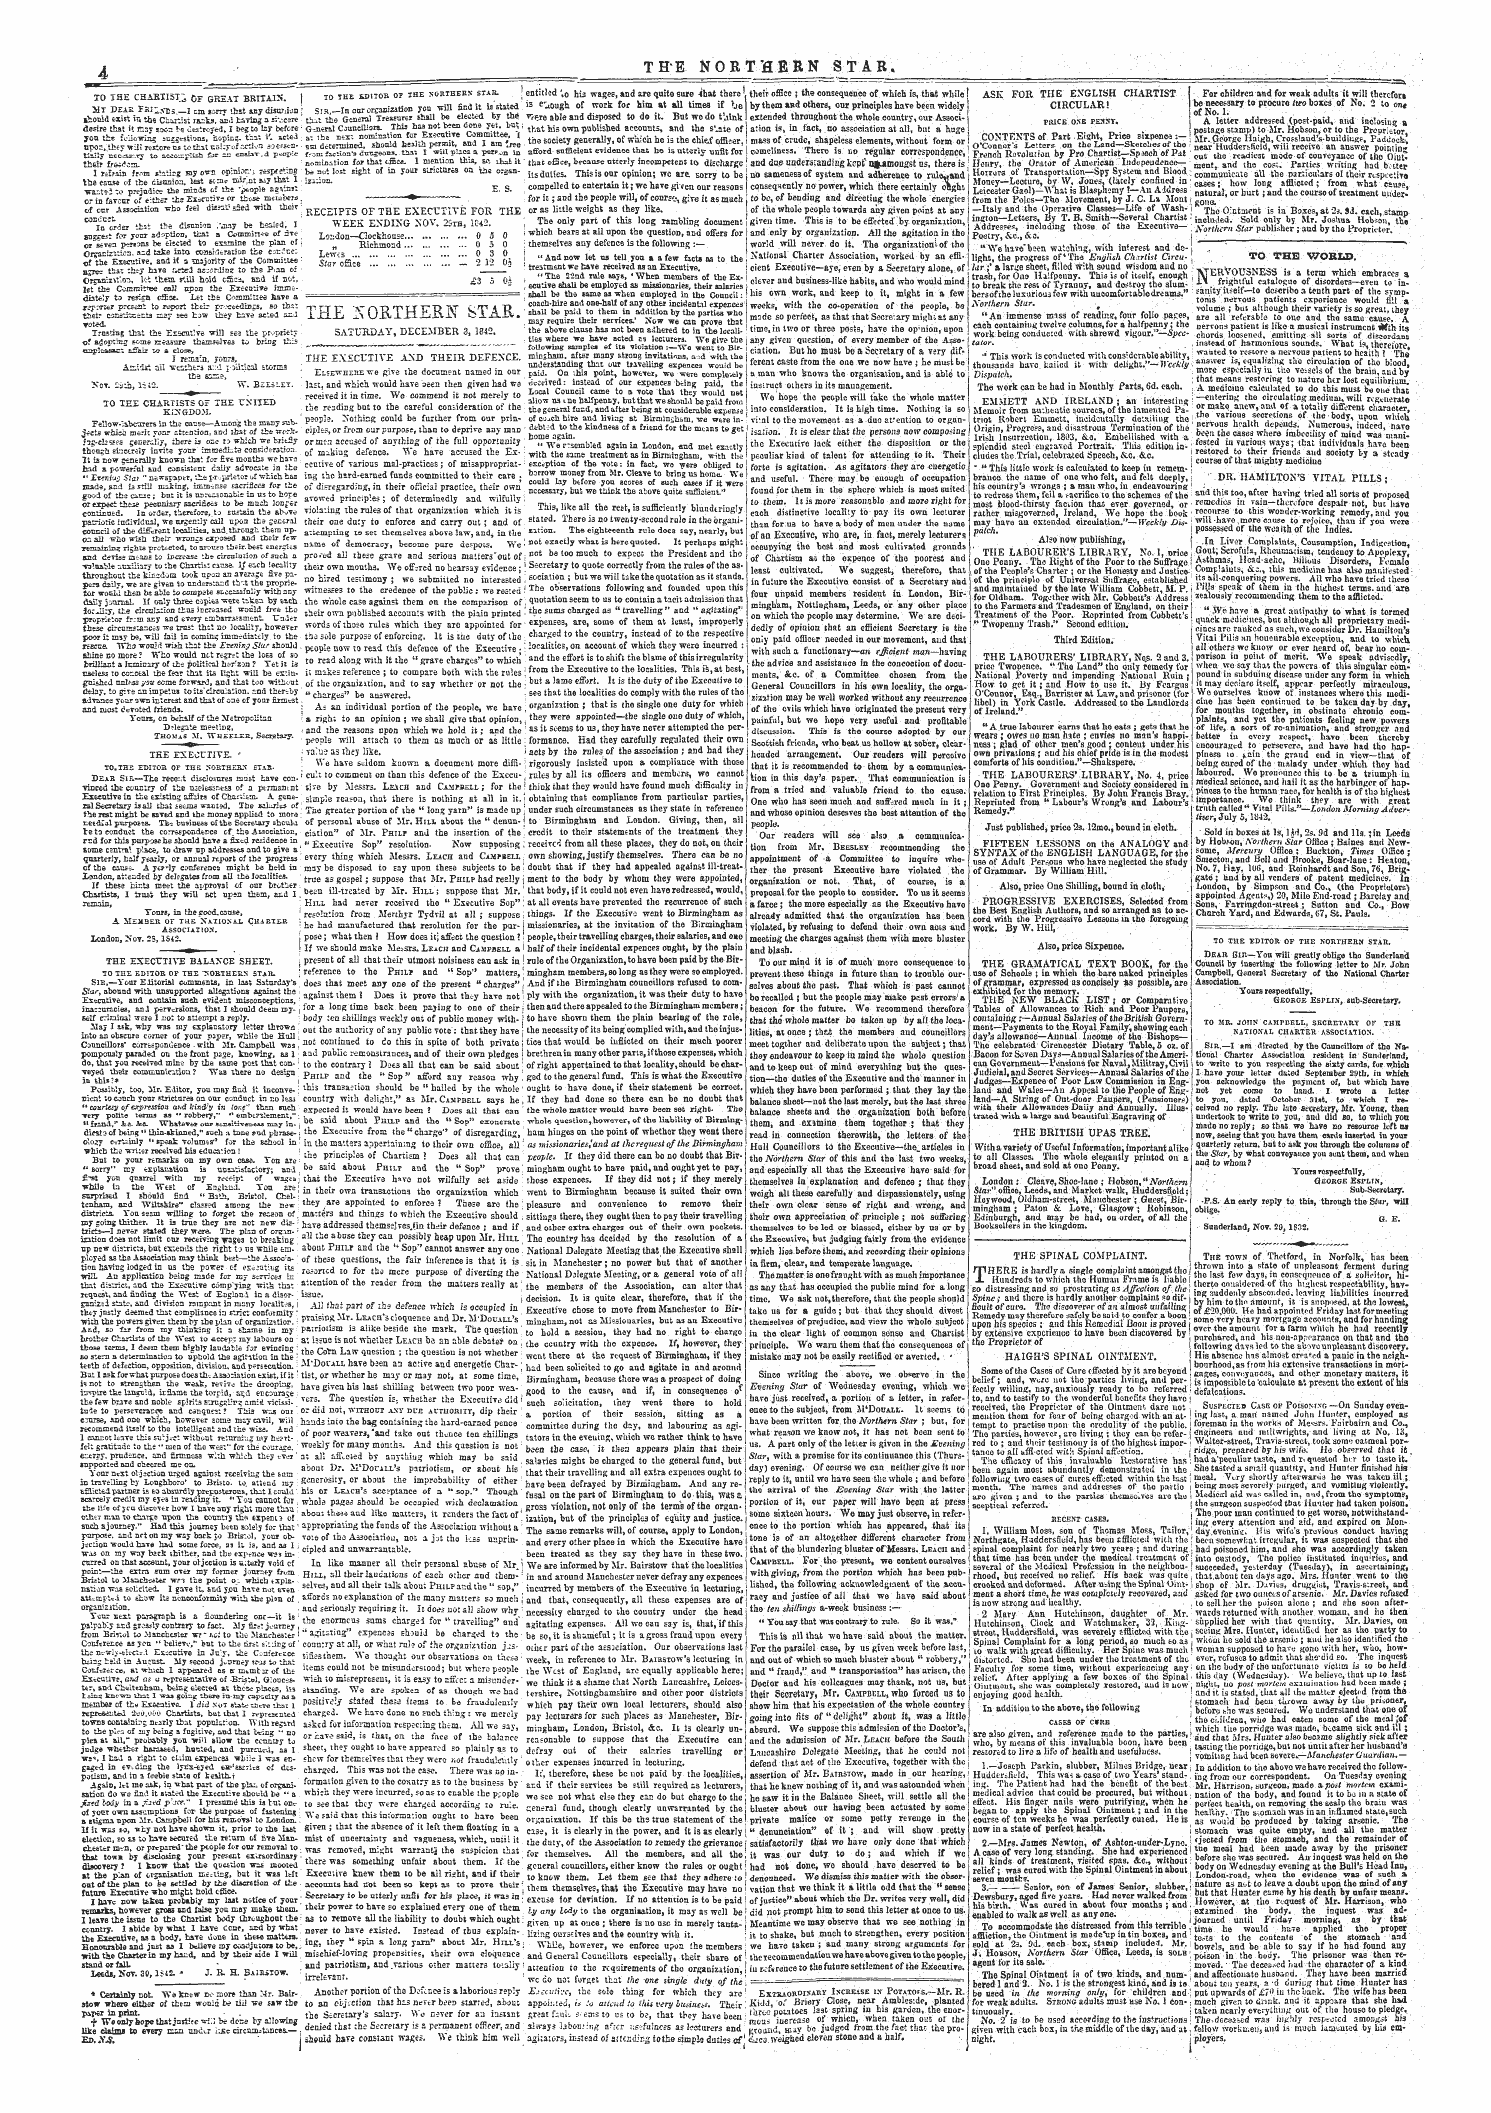 Northern Star (1837-1852): jS F Y, 7th edition - To The Editor Of The Northern Star.